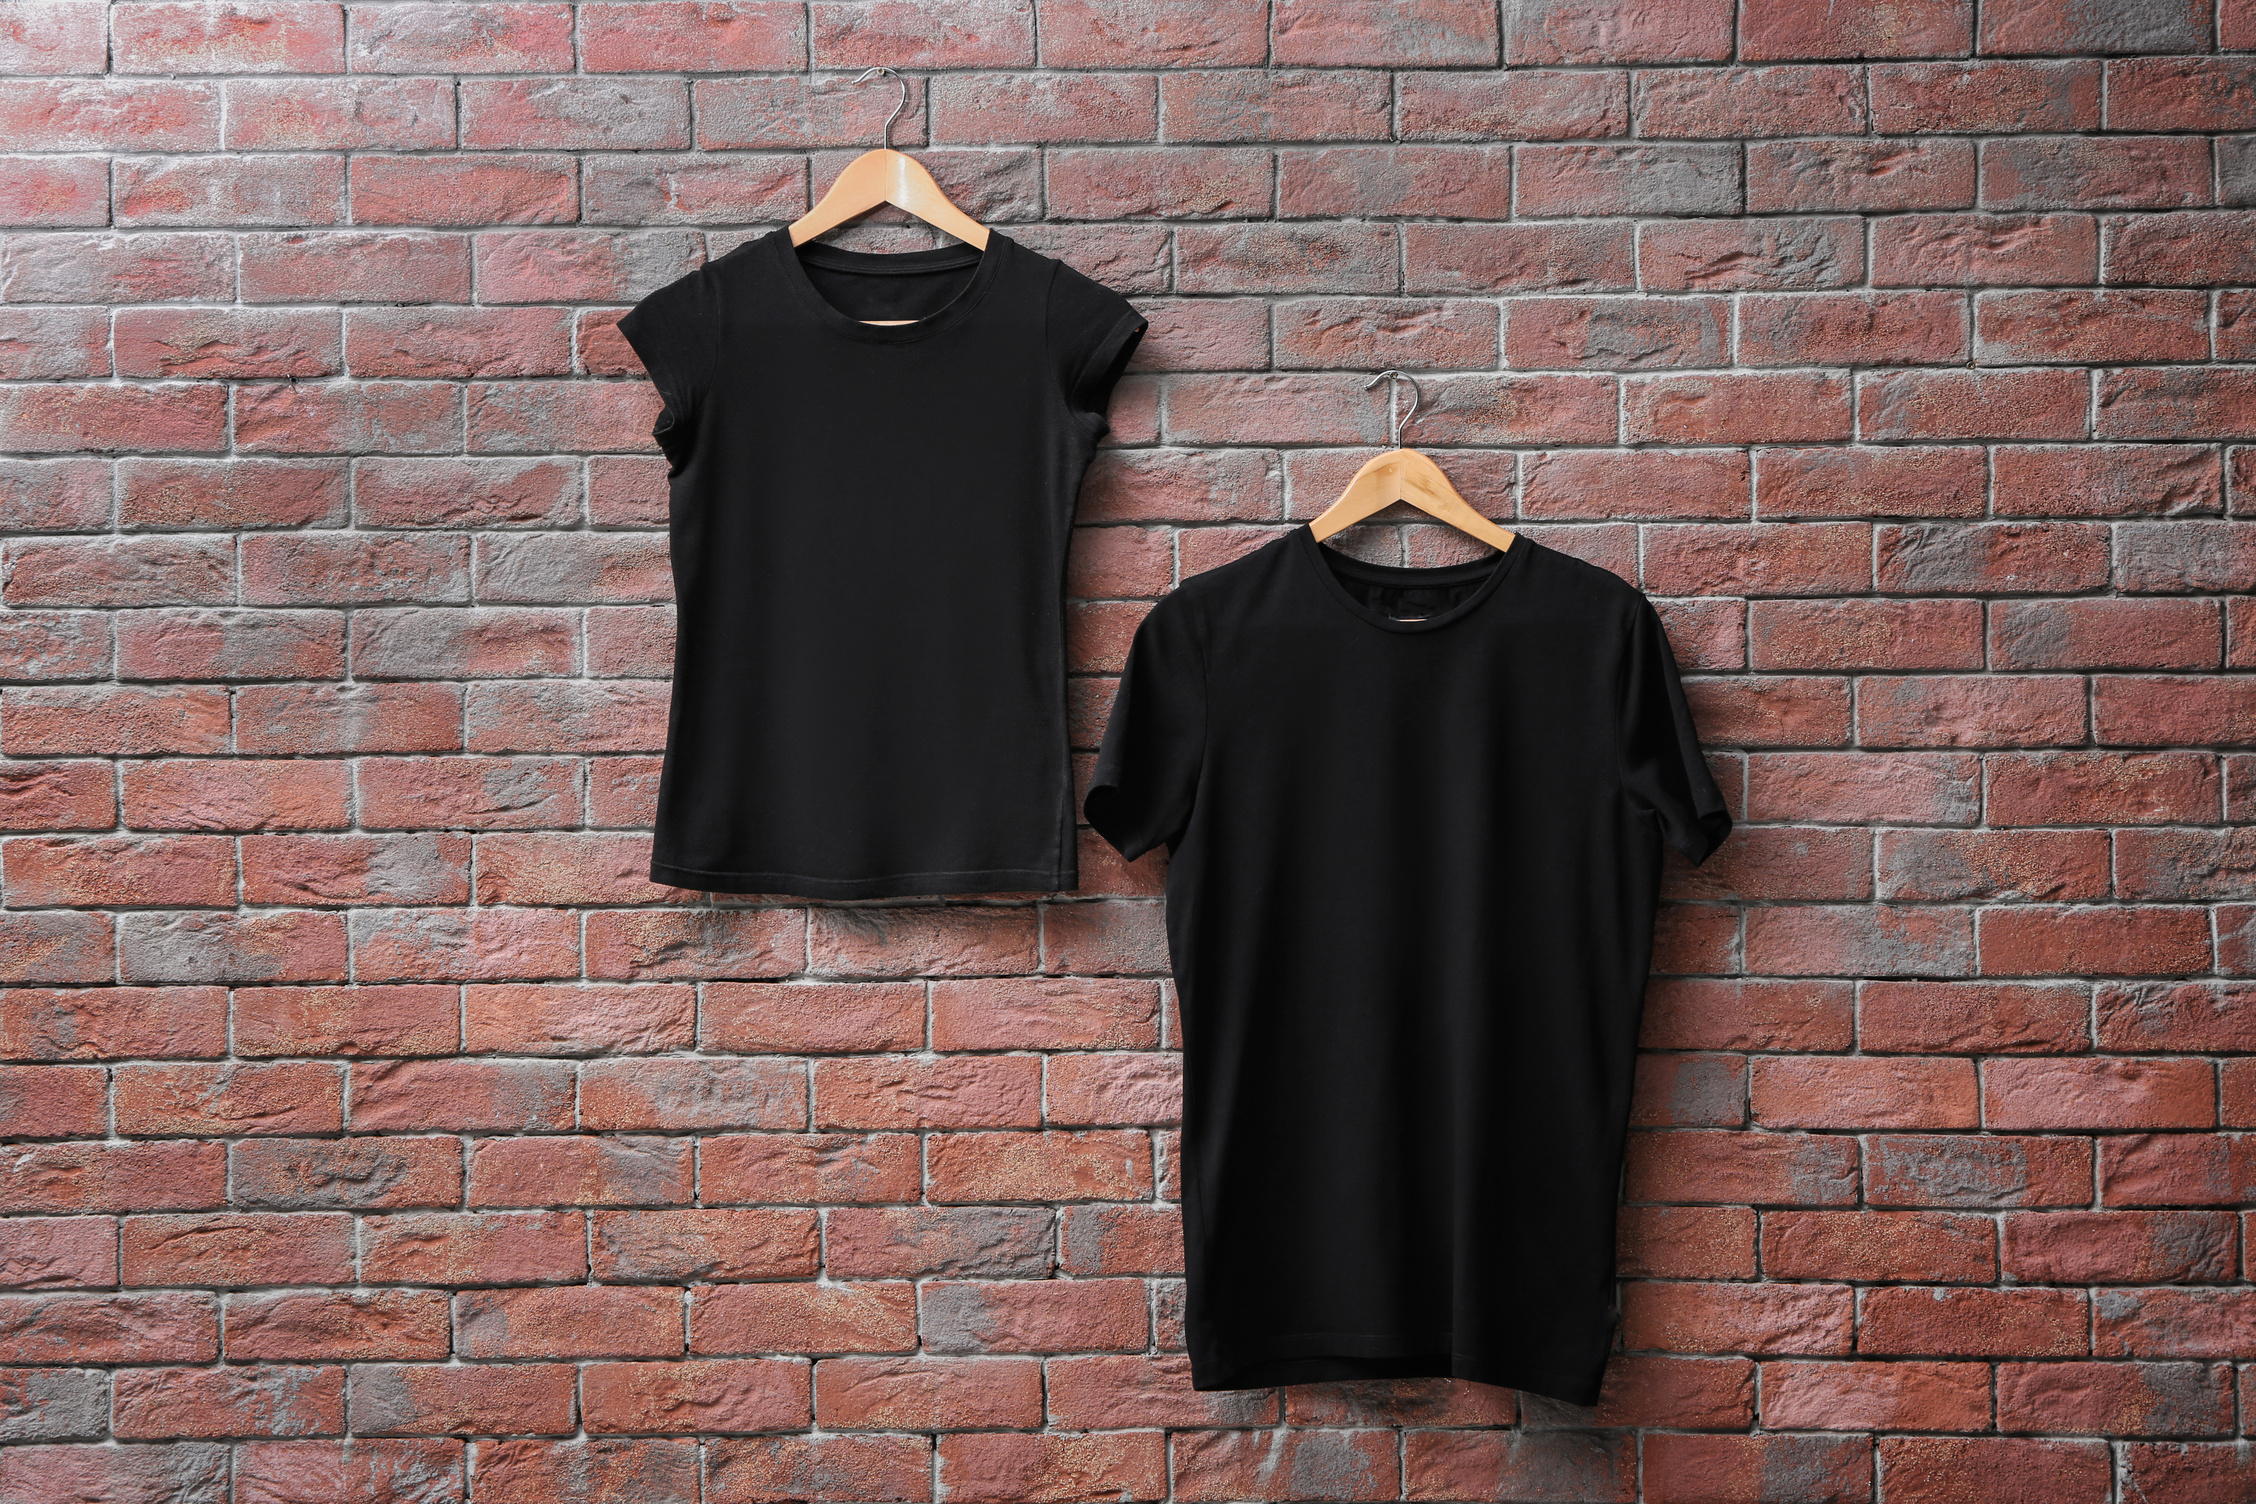 Black T-shirts on Hanger Against Brick Wall